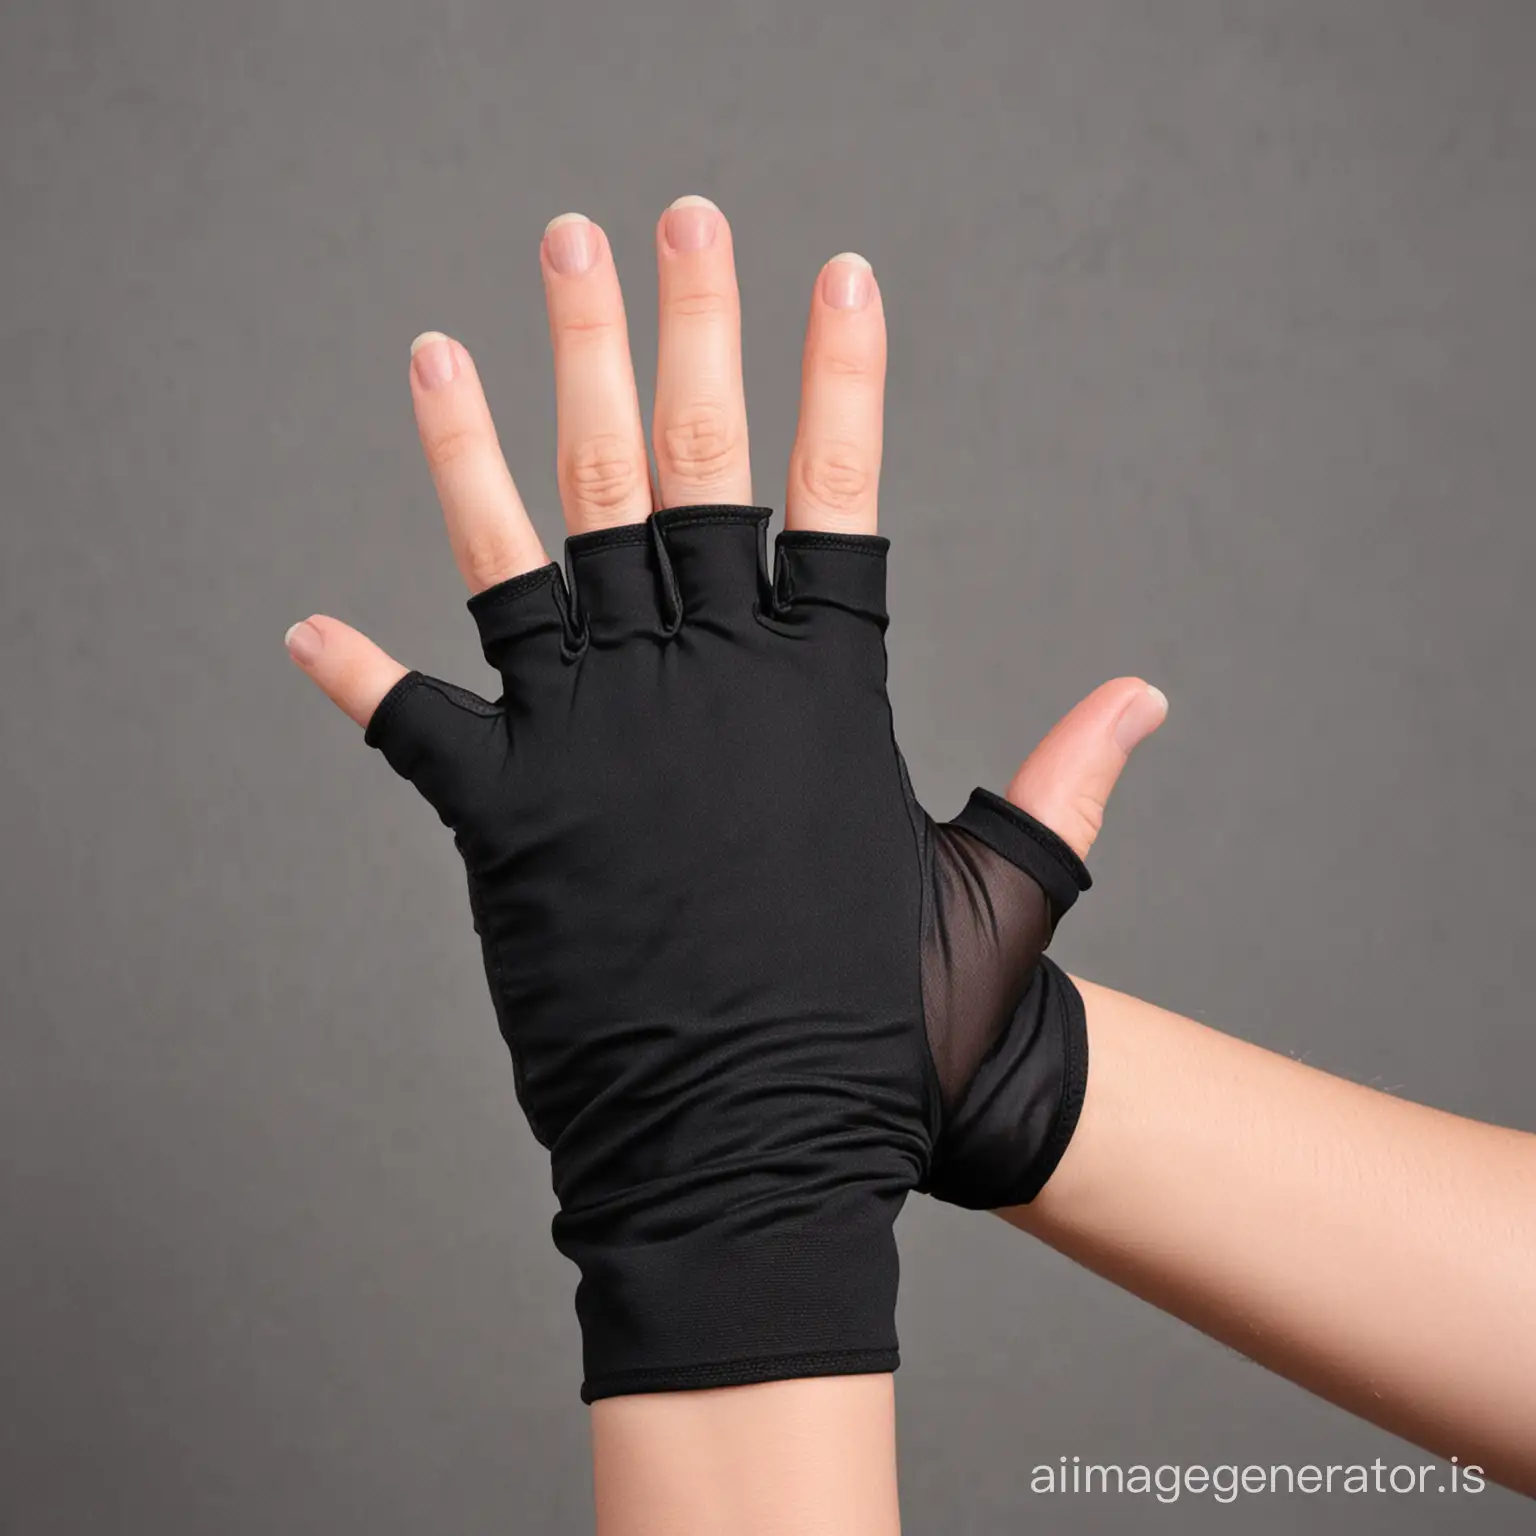 hand facing palm down modeling a short, black, nylon, fingerless glove with all fingers exposed except for the 4th finger